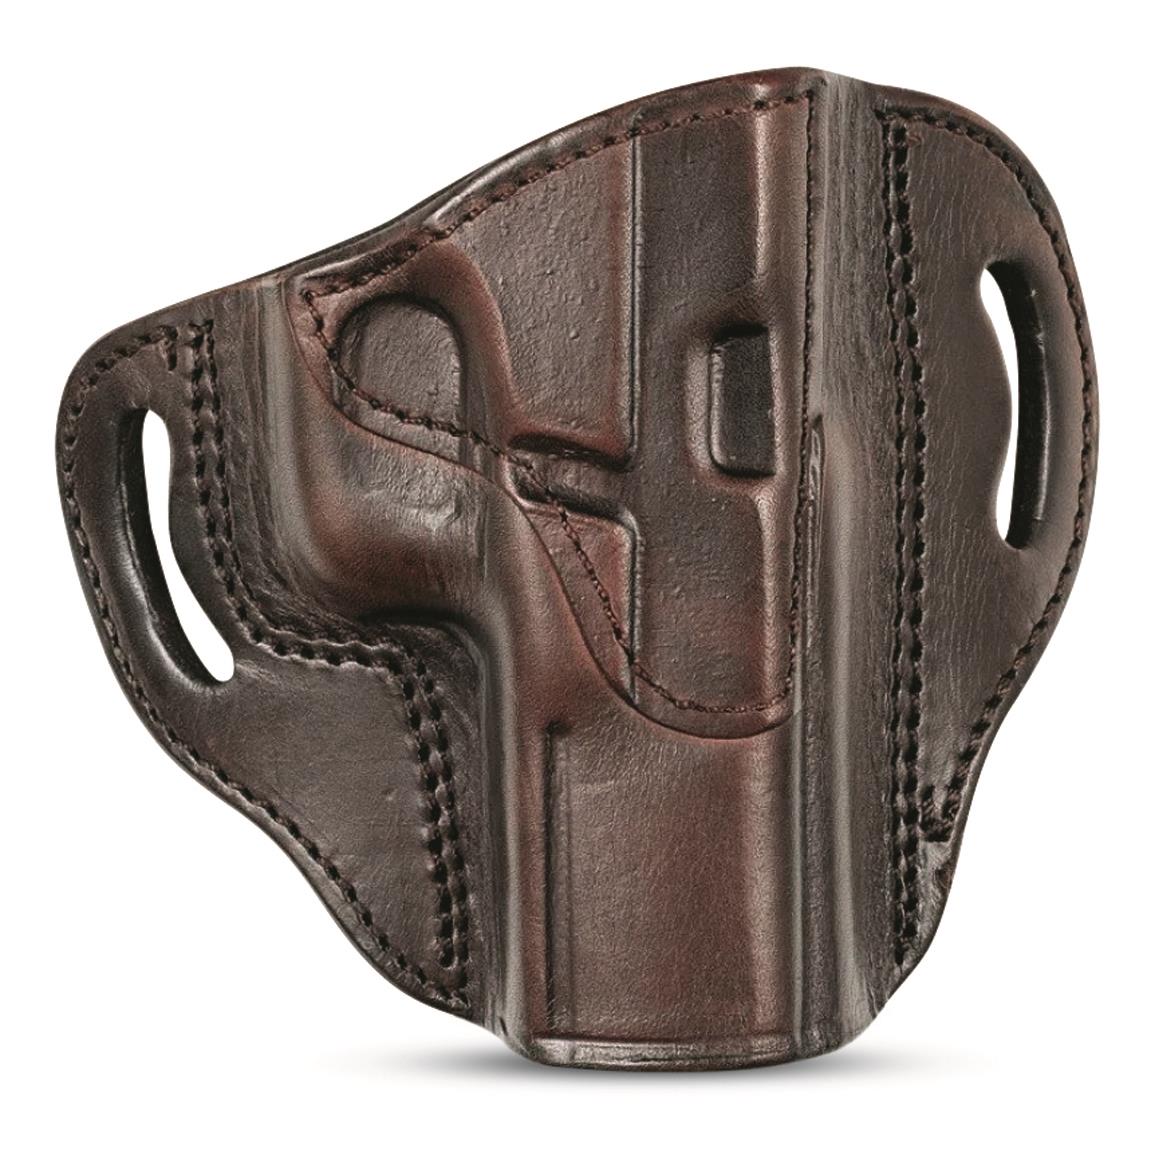 Tagua TX-Cannon Brown Leather Multi-Fit OWB Holster, Full-Size 1911s